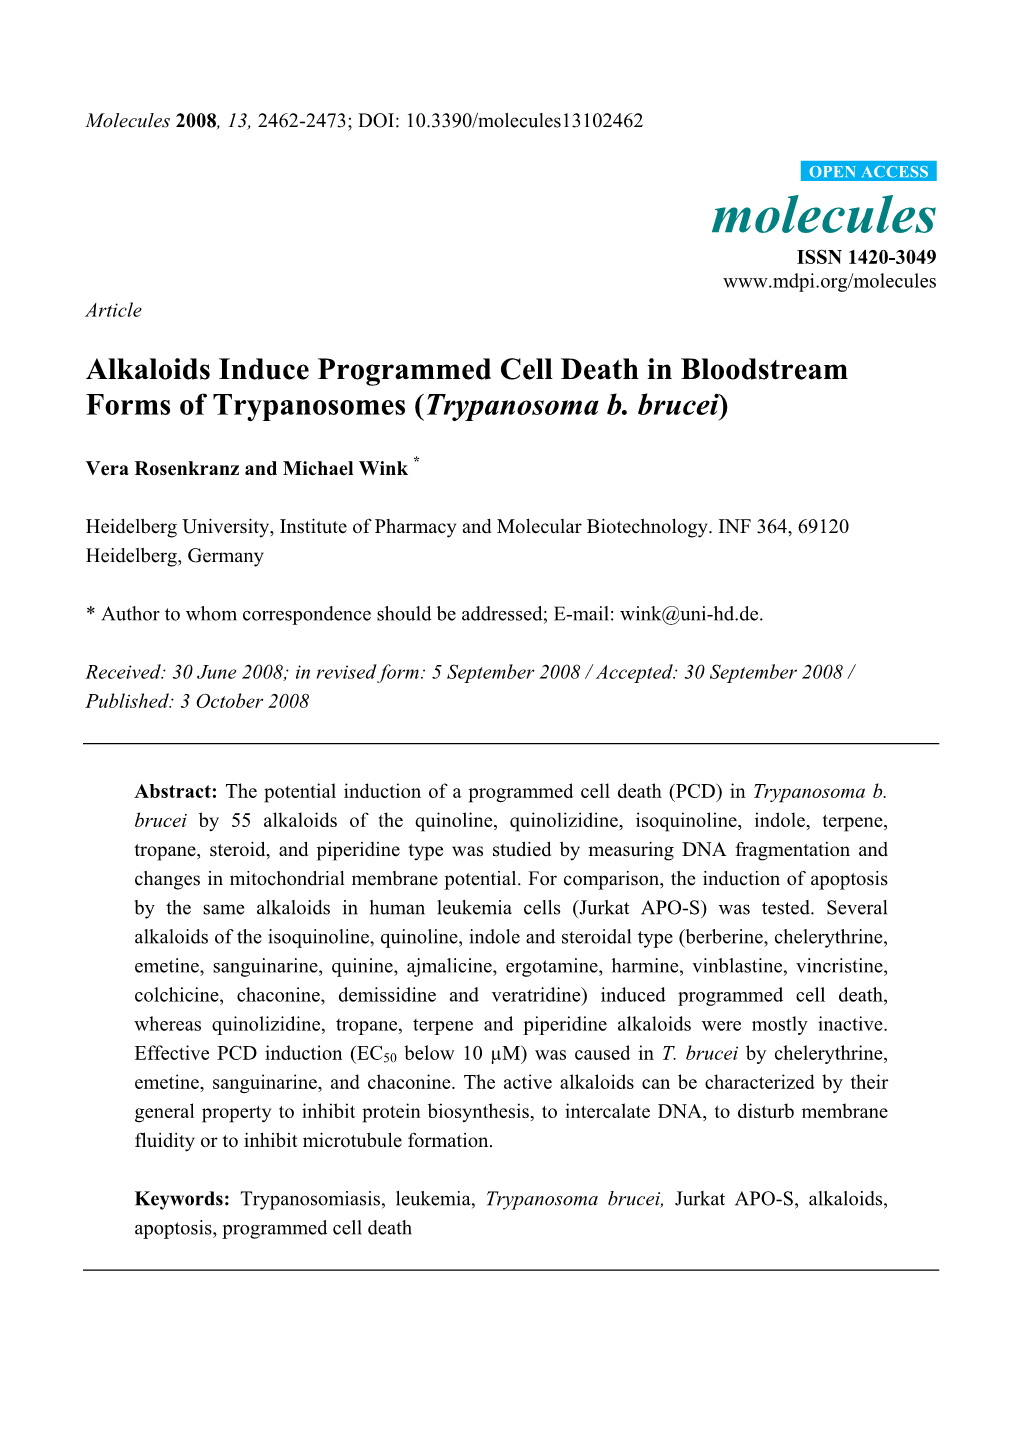 Alkaloids Induce Programmed Cell Death in Bloodstream Forms of Trypanosomes (Trypanosoma B